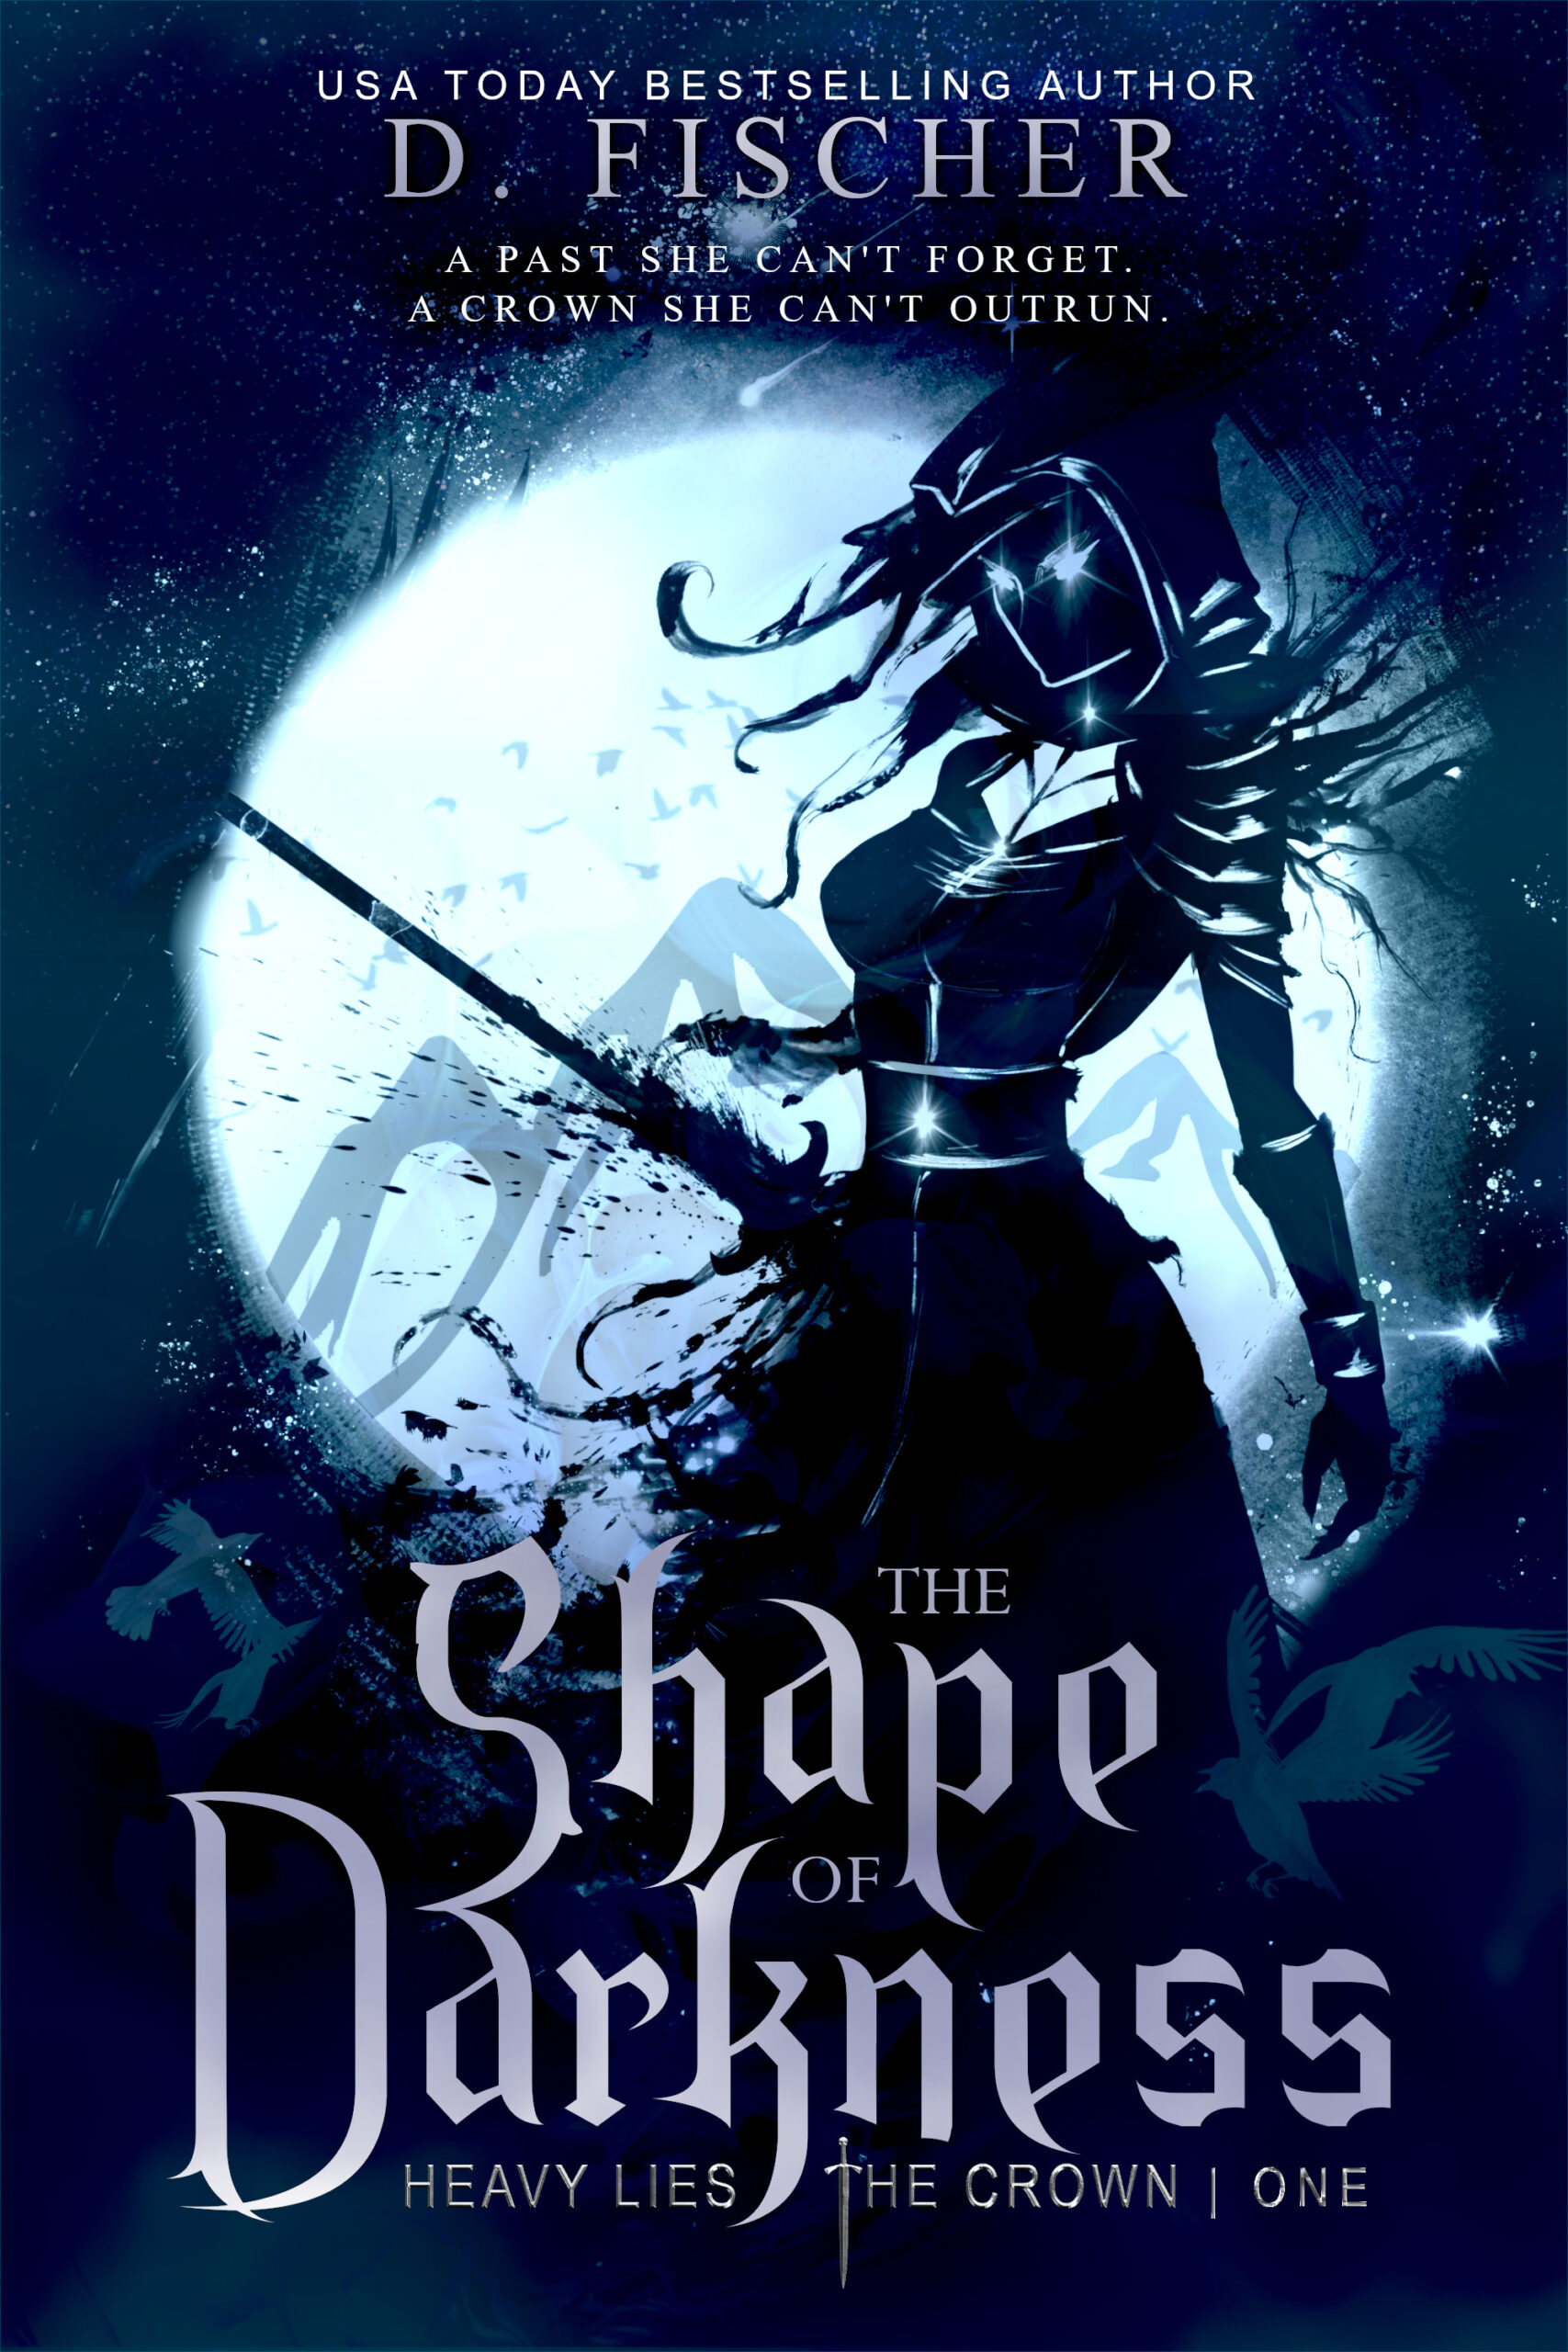 FREE: The Shape of Darkness (Heavy Lies the Crown) by D. Fischer